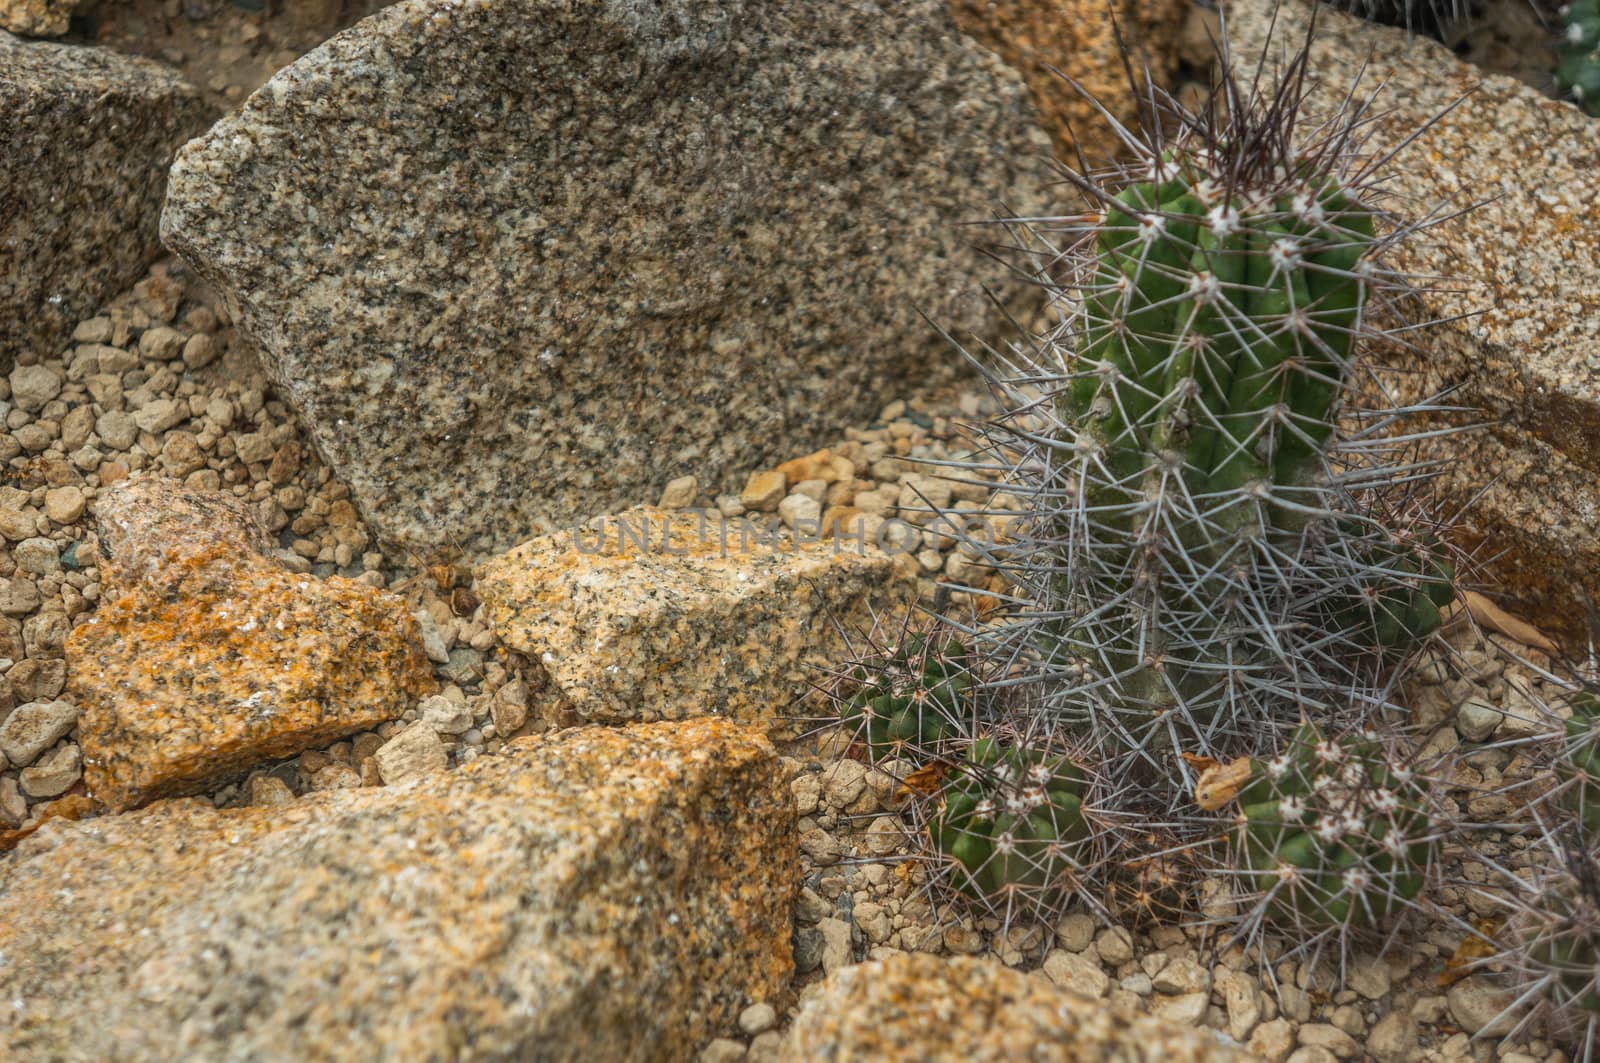 Small group of  green "copiapoa echinata" cactus plants with yellow needles. Yellow and orange rocks in daylight as background and in foregorund.